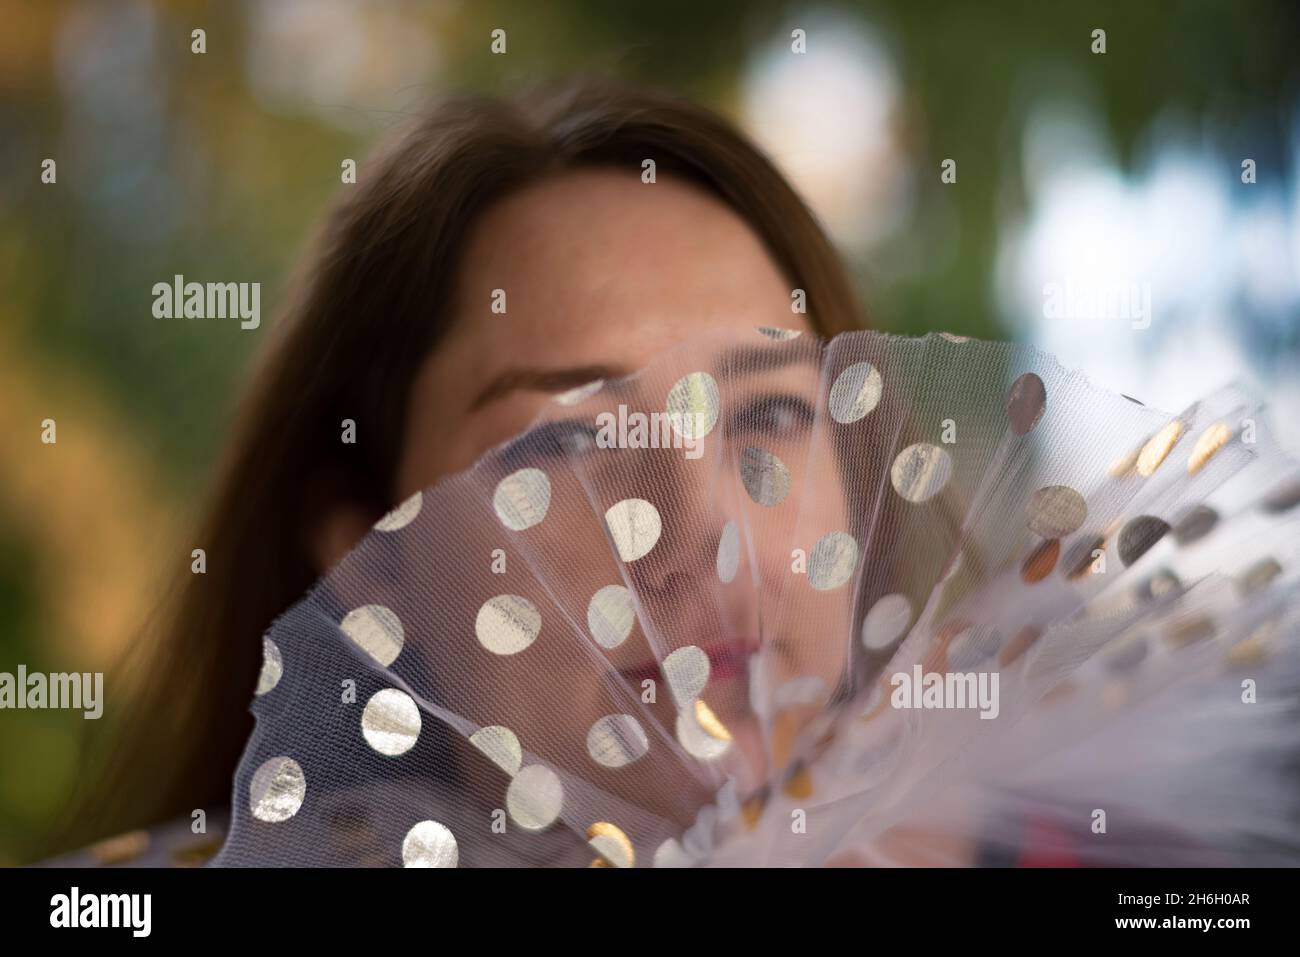 Woman with sheer netting hiding part of her face Stock Photo